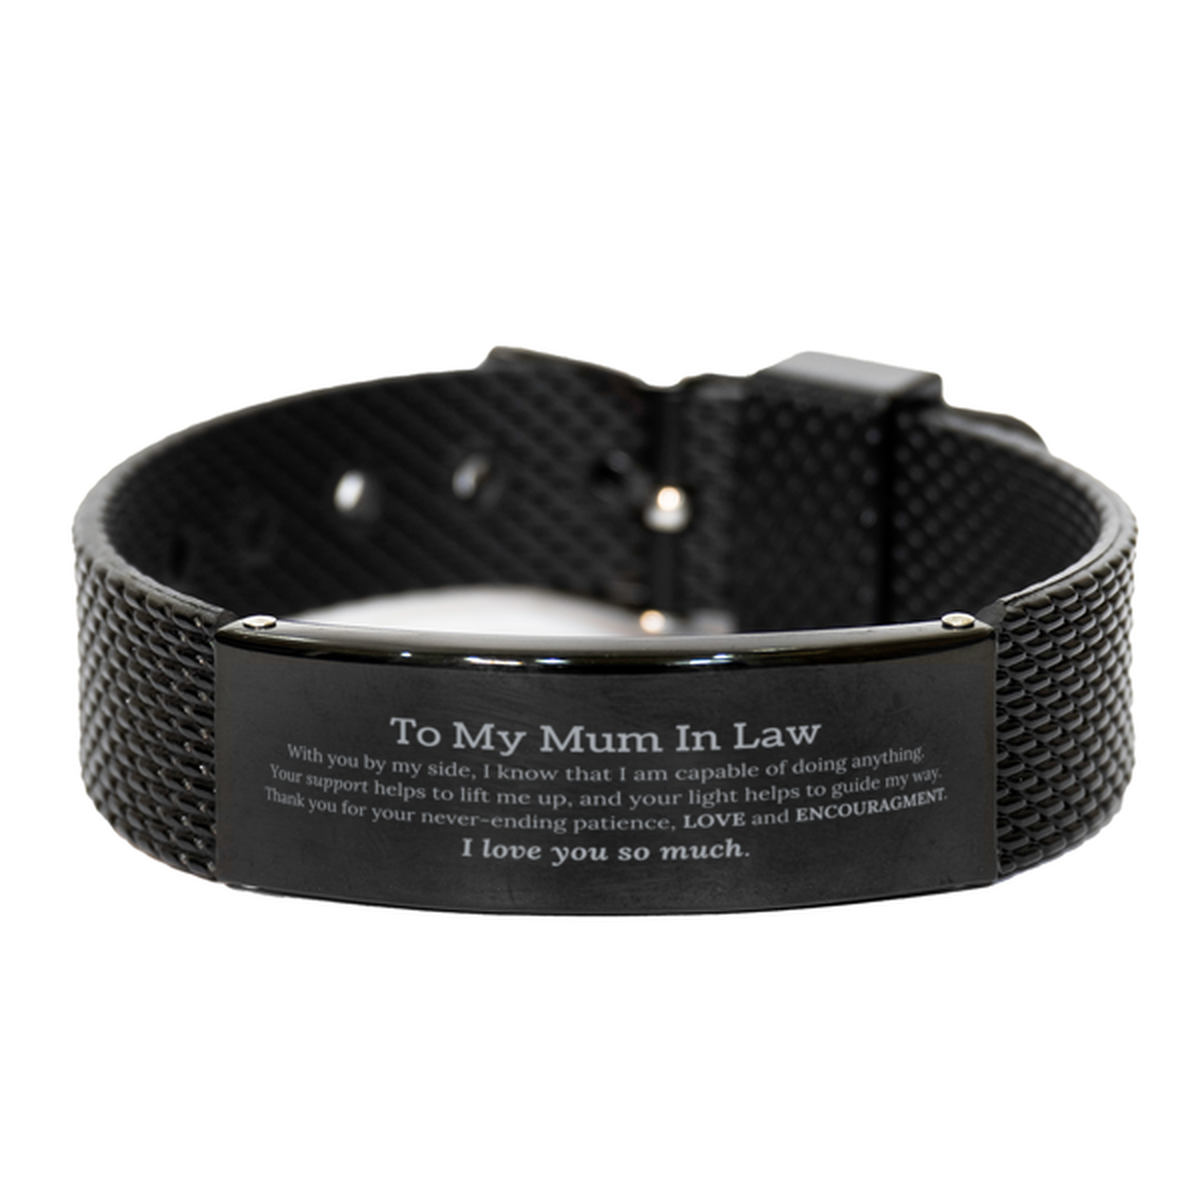 Appreciation Mum In Law  Black Shark Mesh Bracelet Gifts, To My Mum In Law  Birthday Christmas Wedding Keepsake Gifts for Mum In Law  With you by my side, I know that I am capable of doing anything. I love you so much